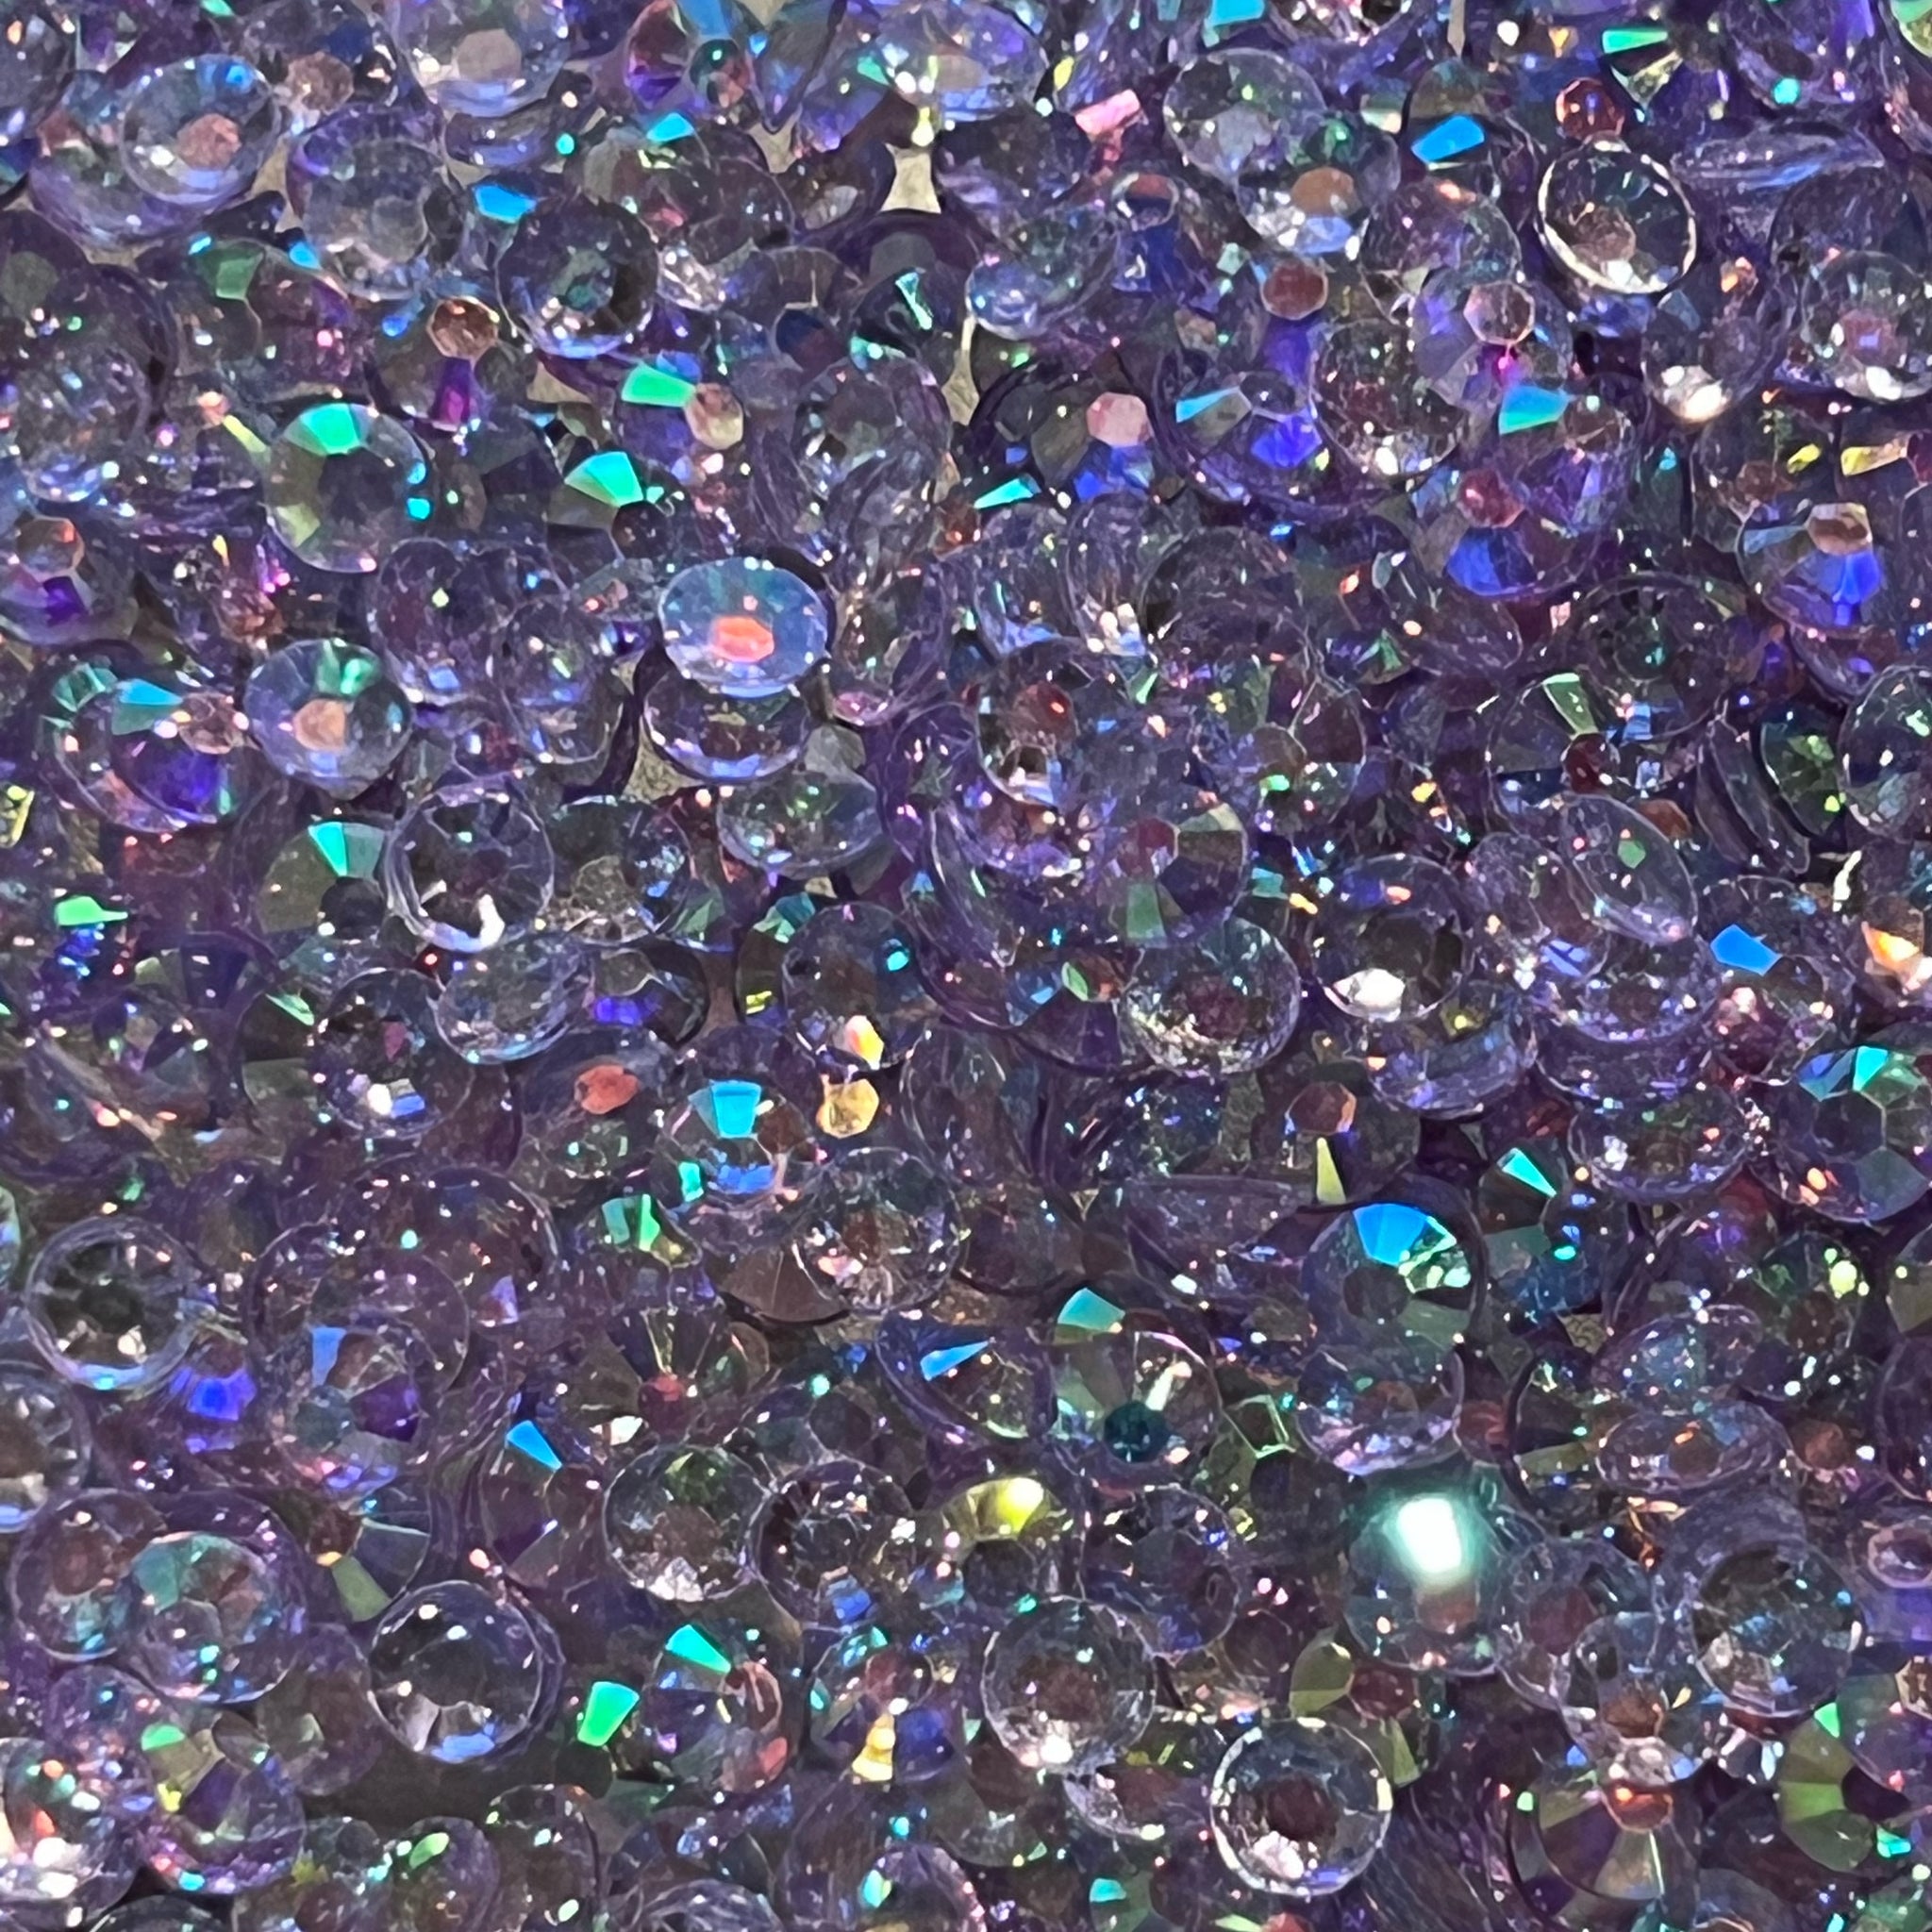 A00004 Transparent AB resin rhinestone – King of Bling